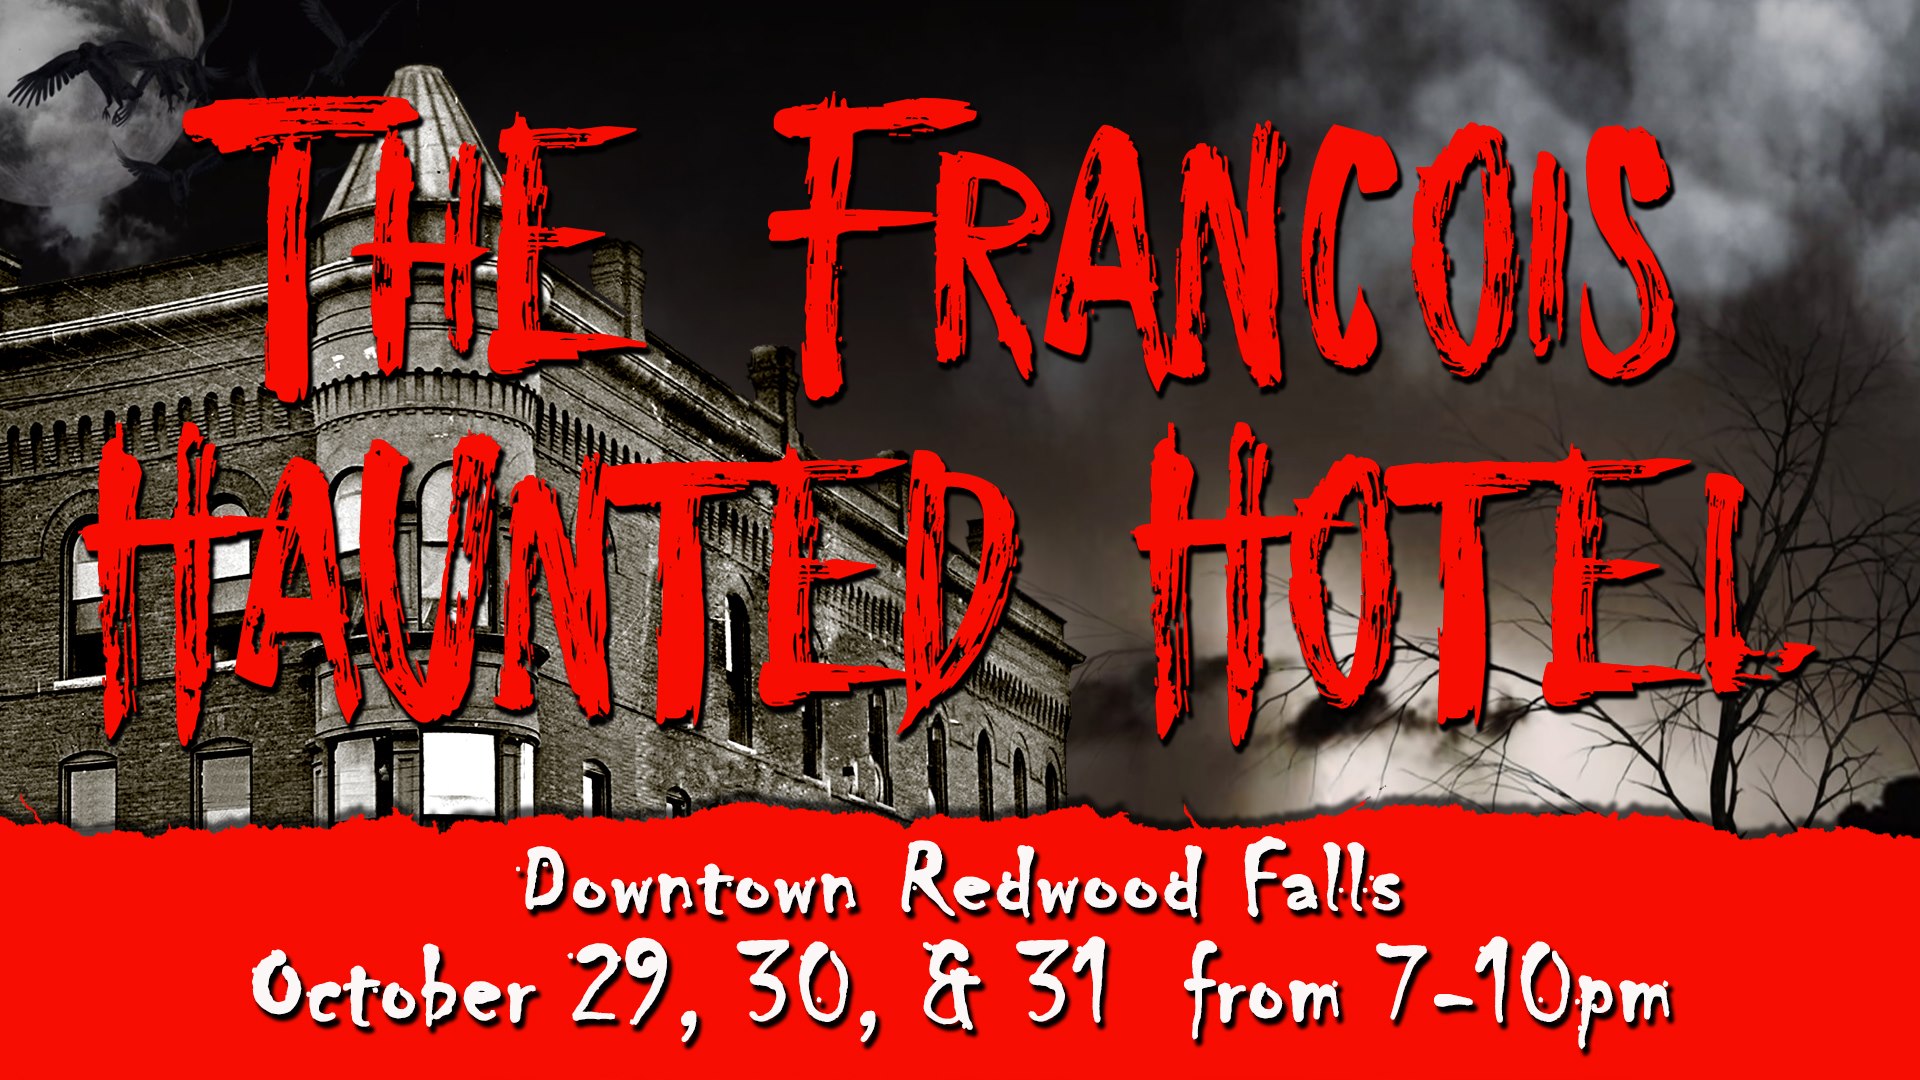 The Francois Haunted Hotel